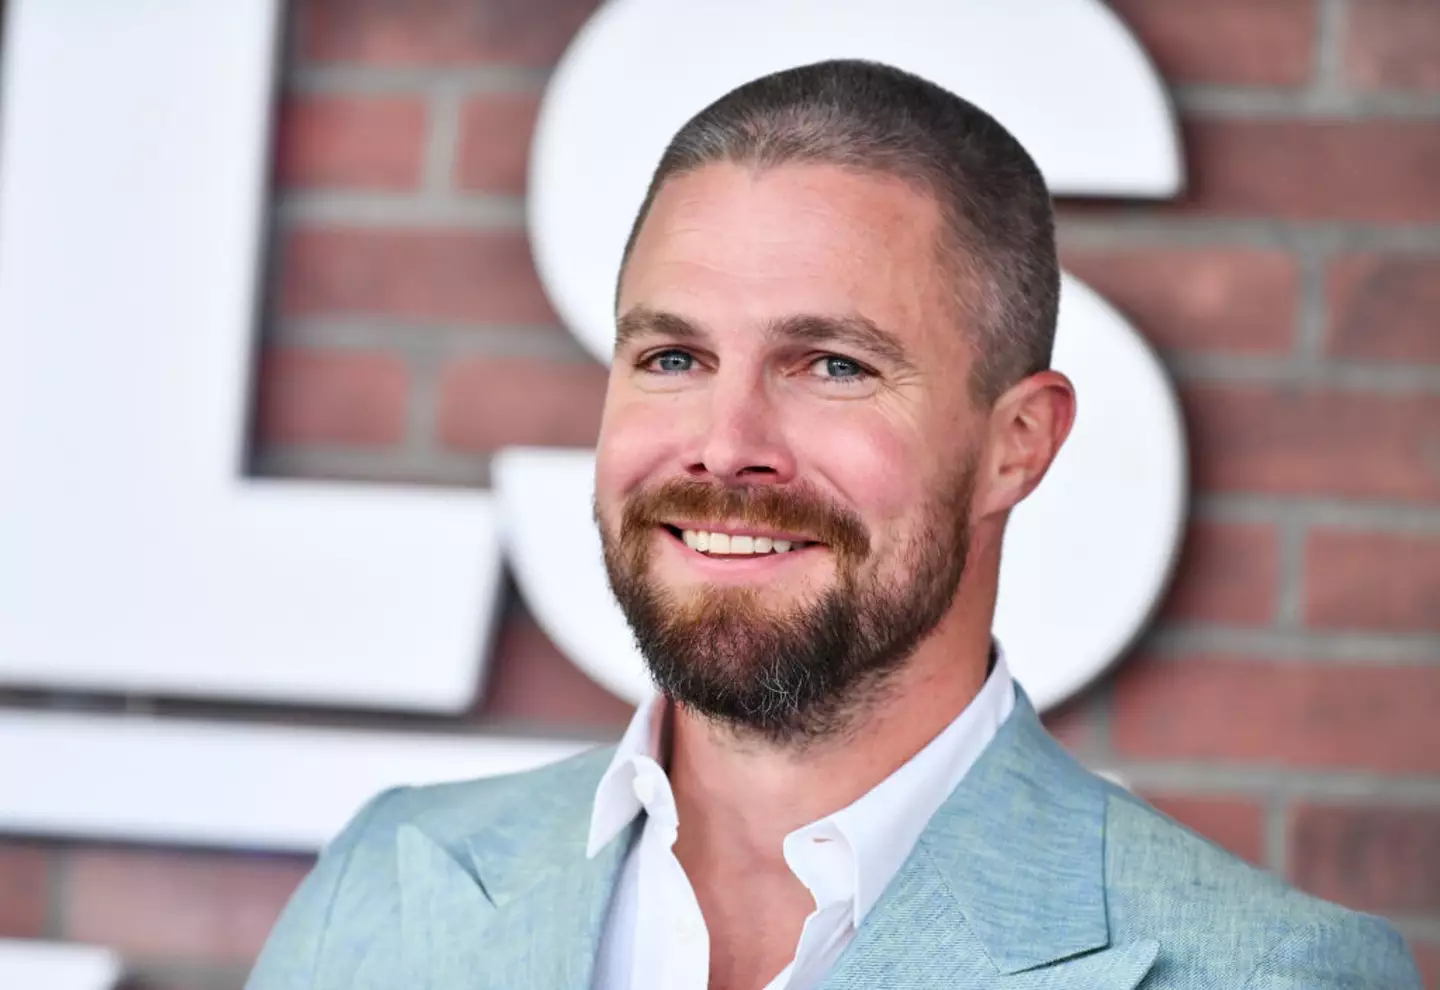 The 'Arrow' star is set to suit up as an LA lawyer in the Suits spinoff.